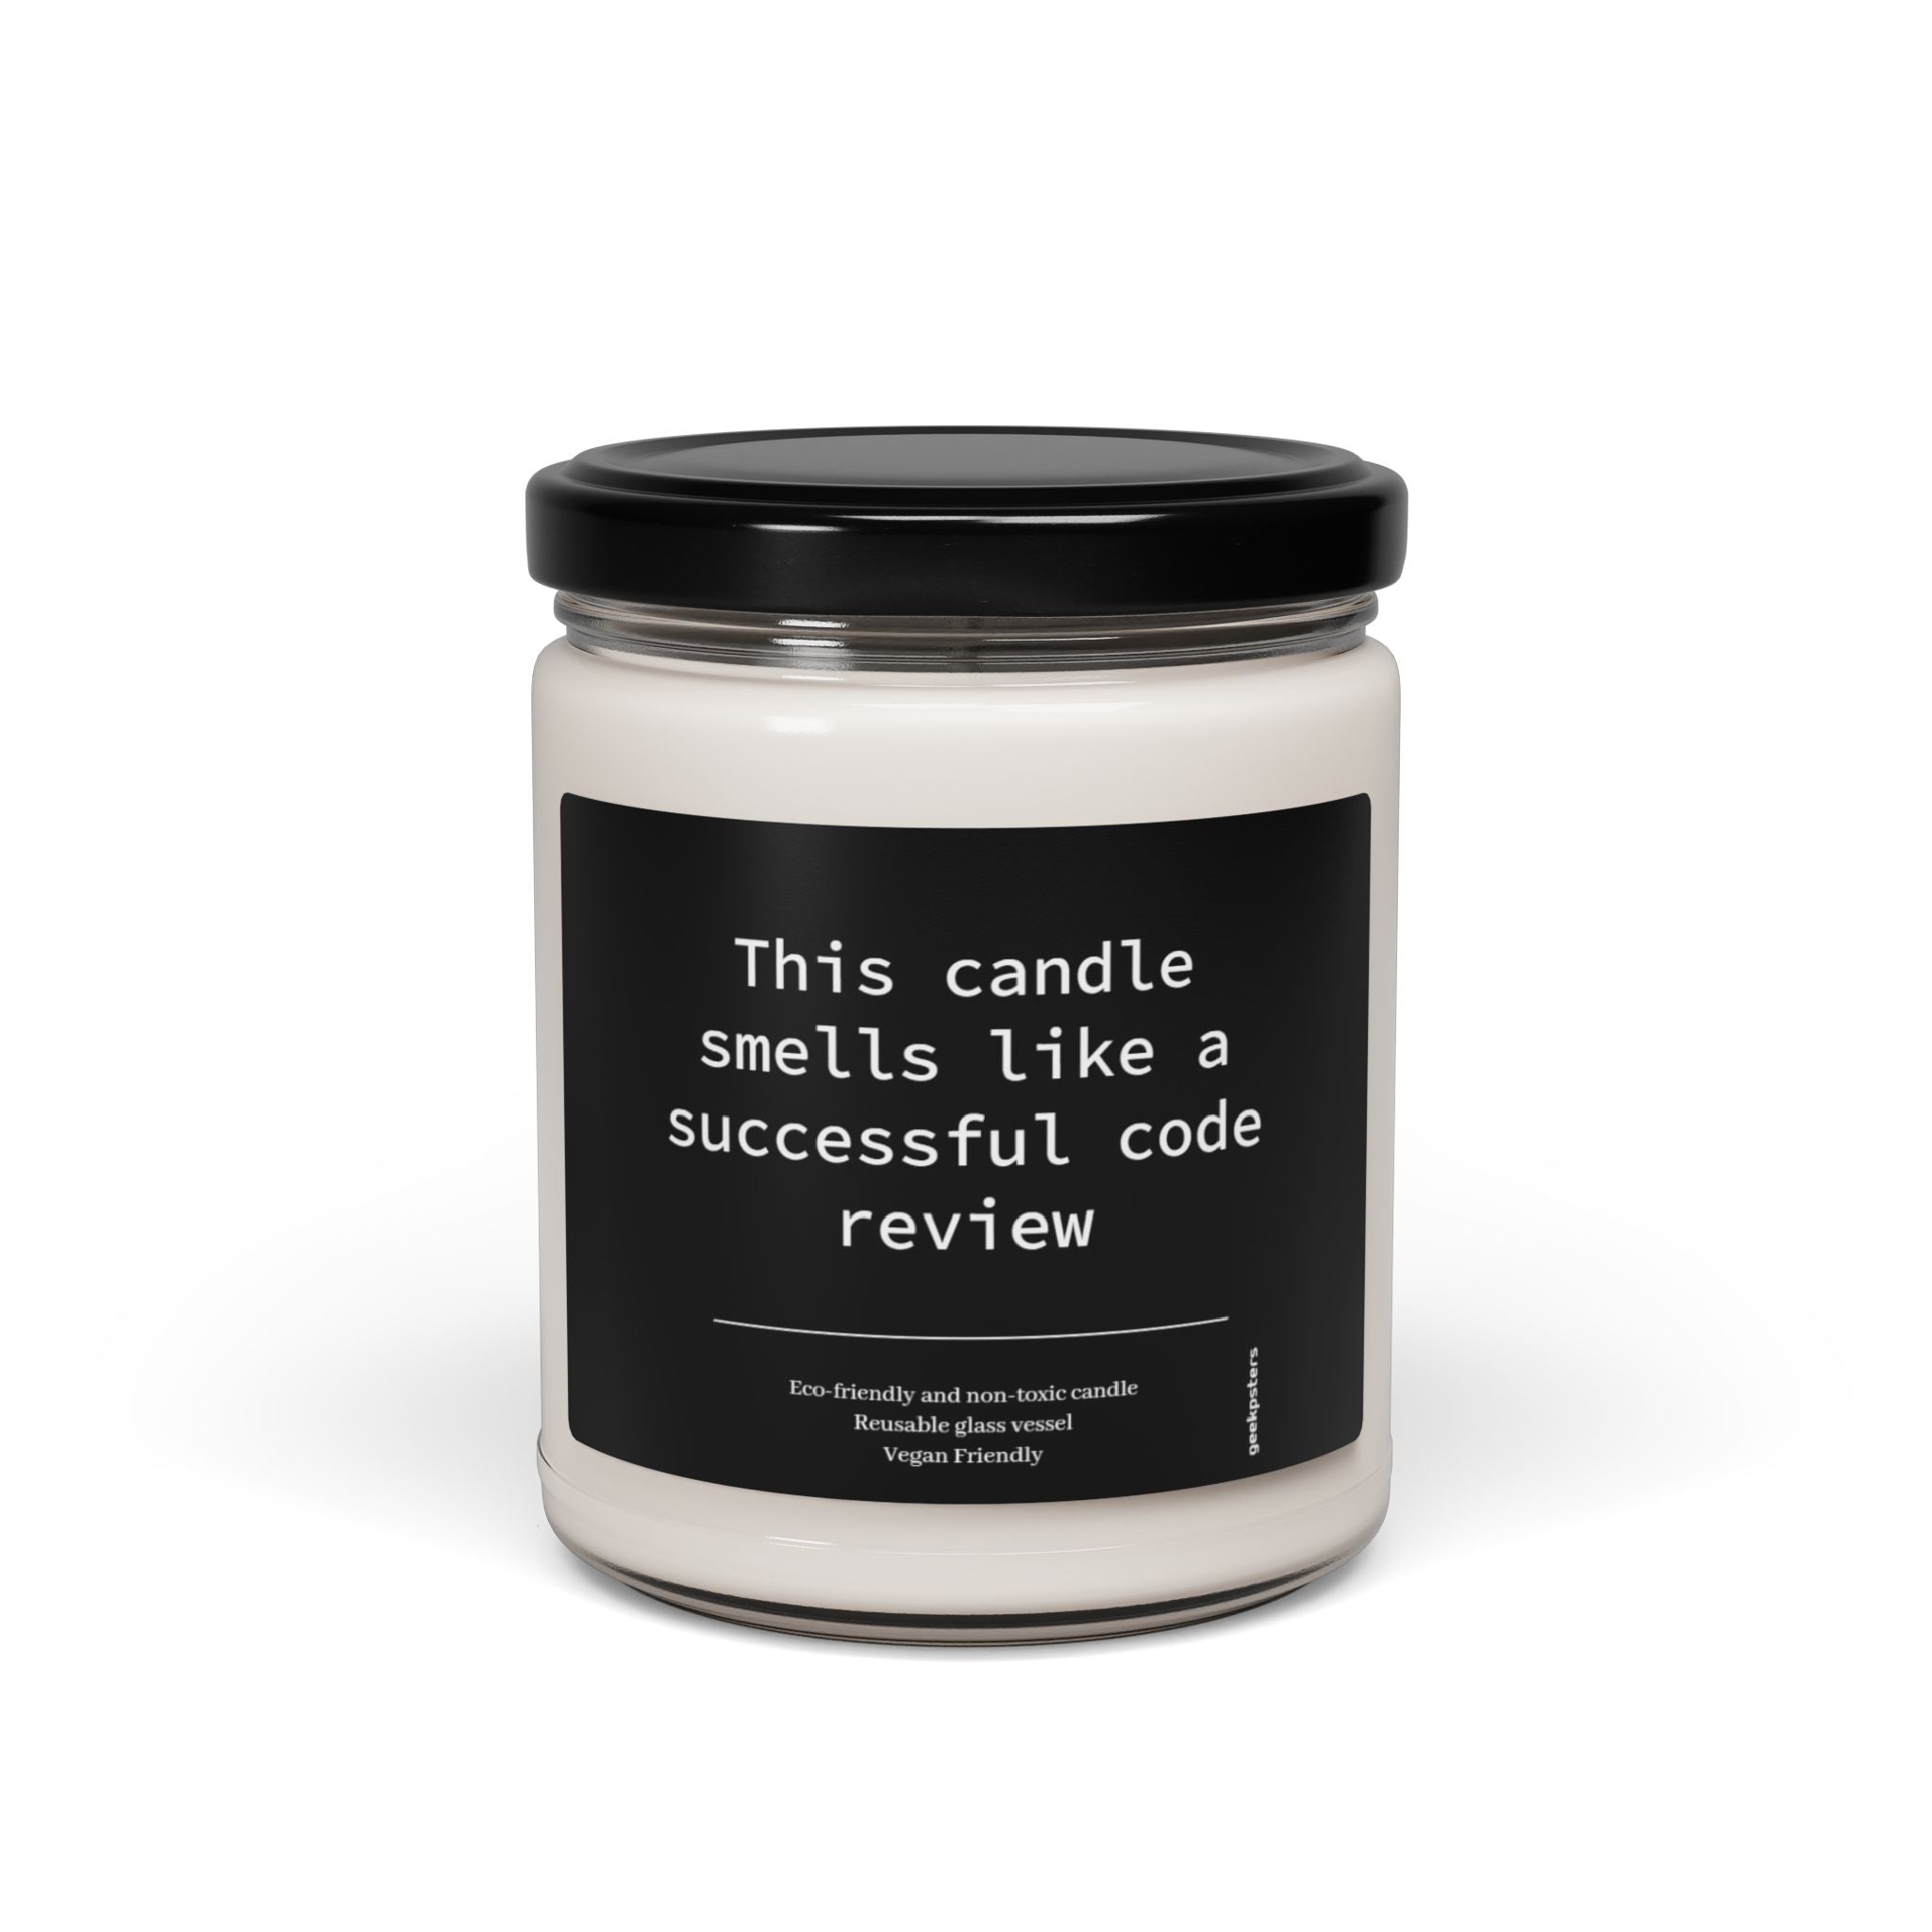 This Candle Smells like a Successful Code Review - Scented Soy Candle, 9oz